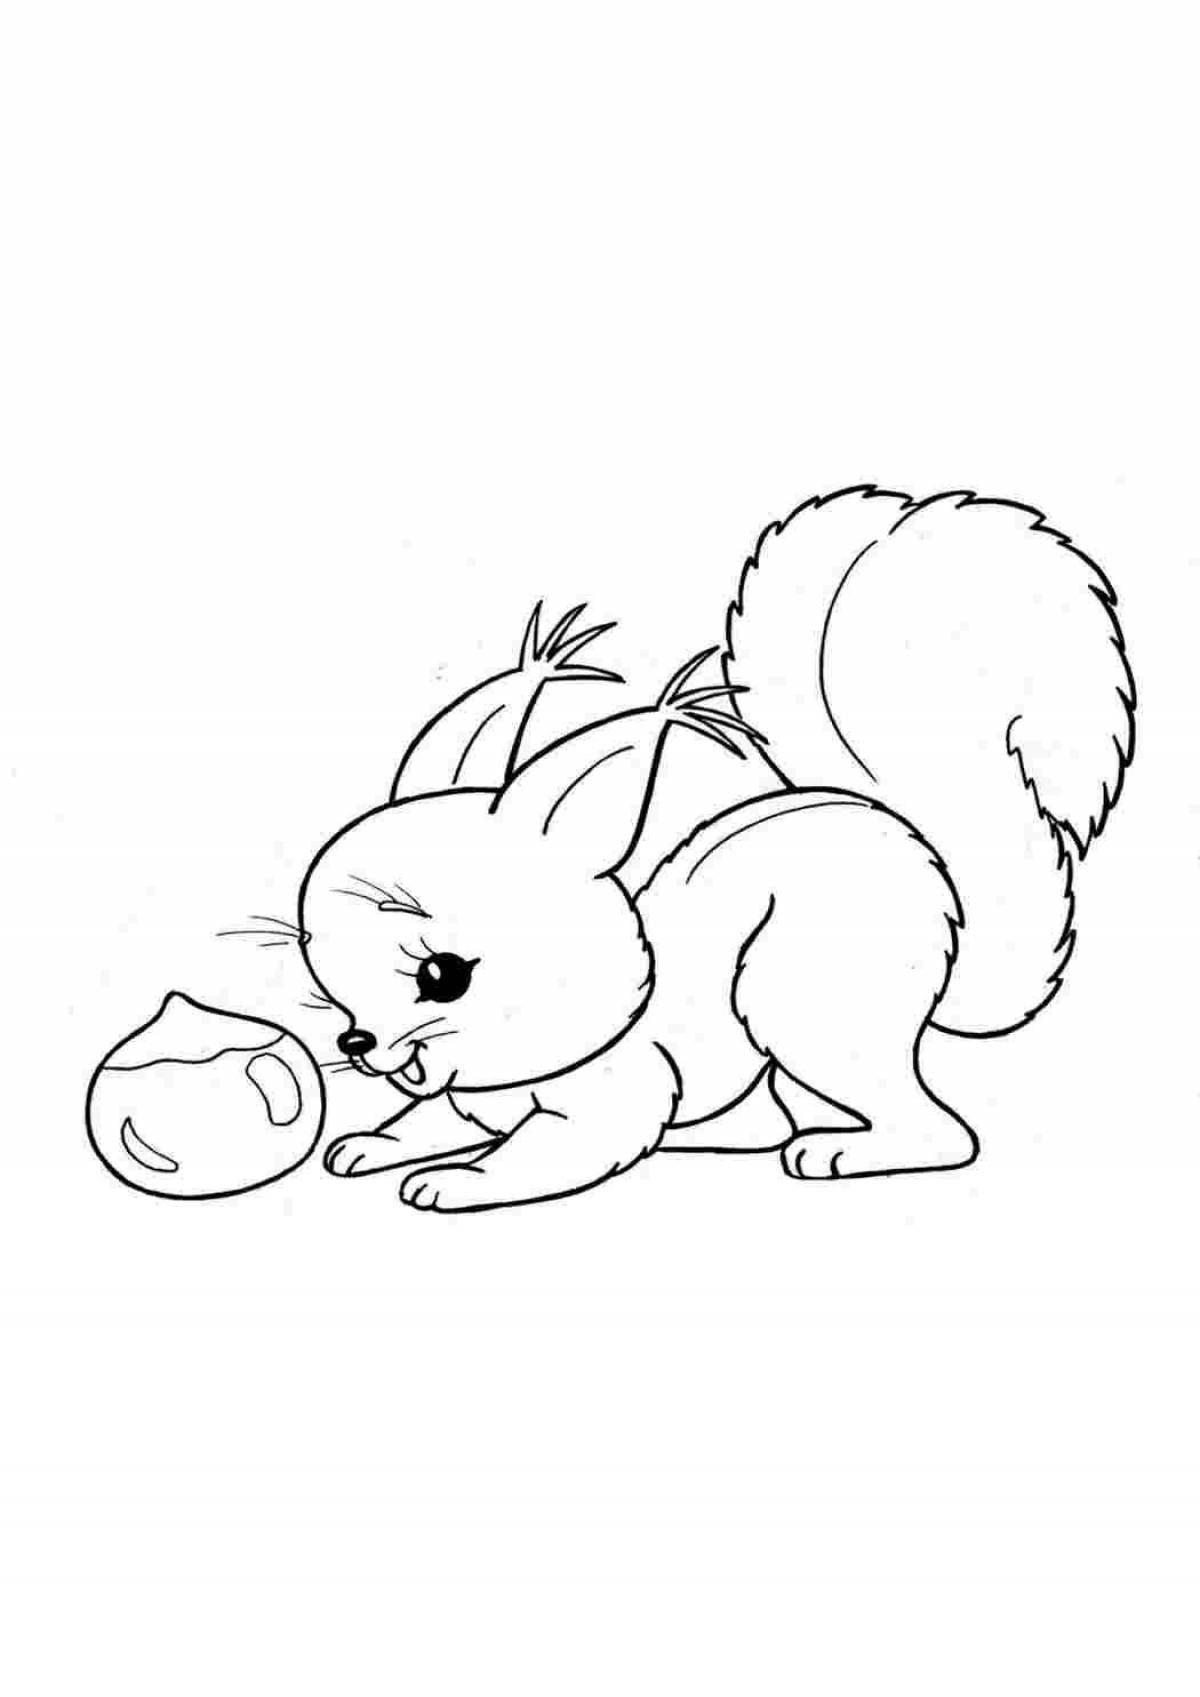 Great squirrel coloring book for kids